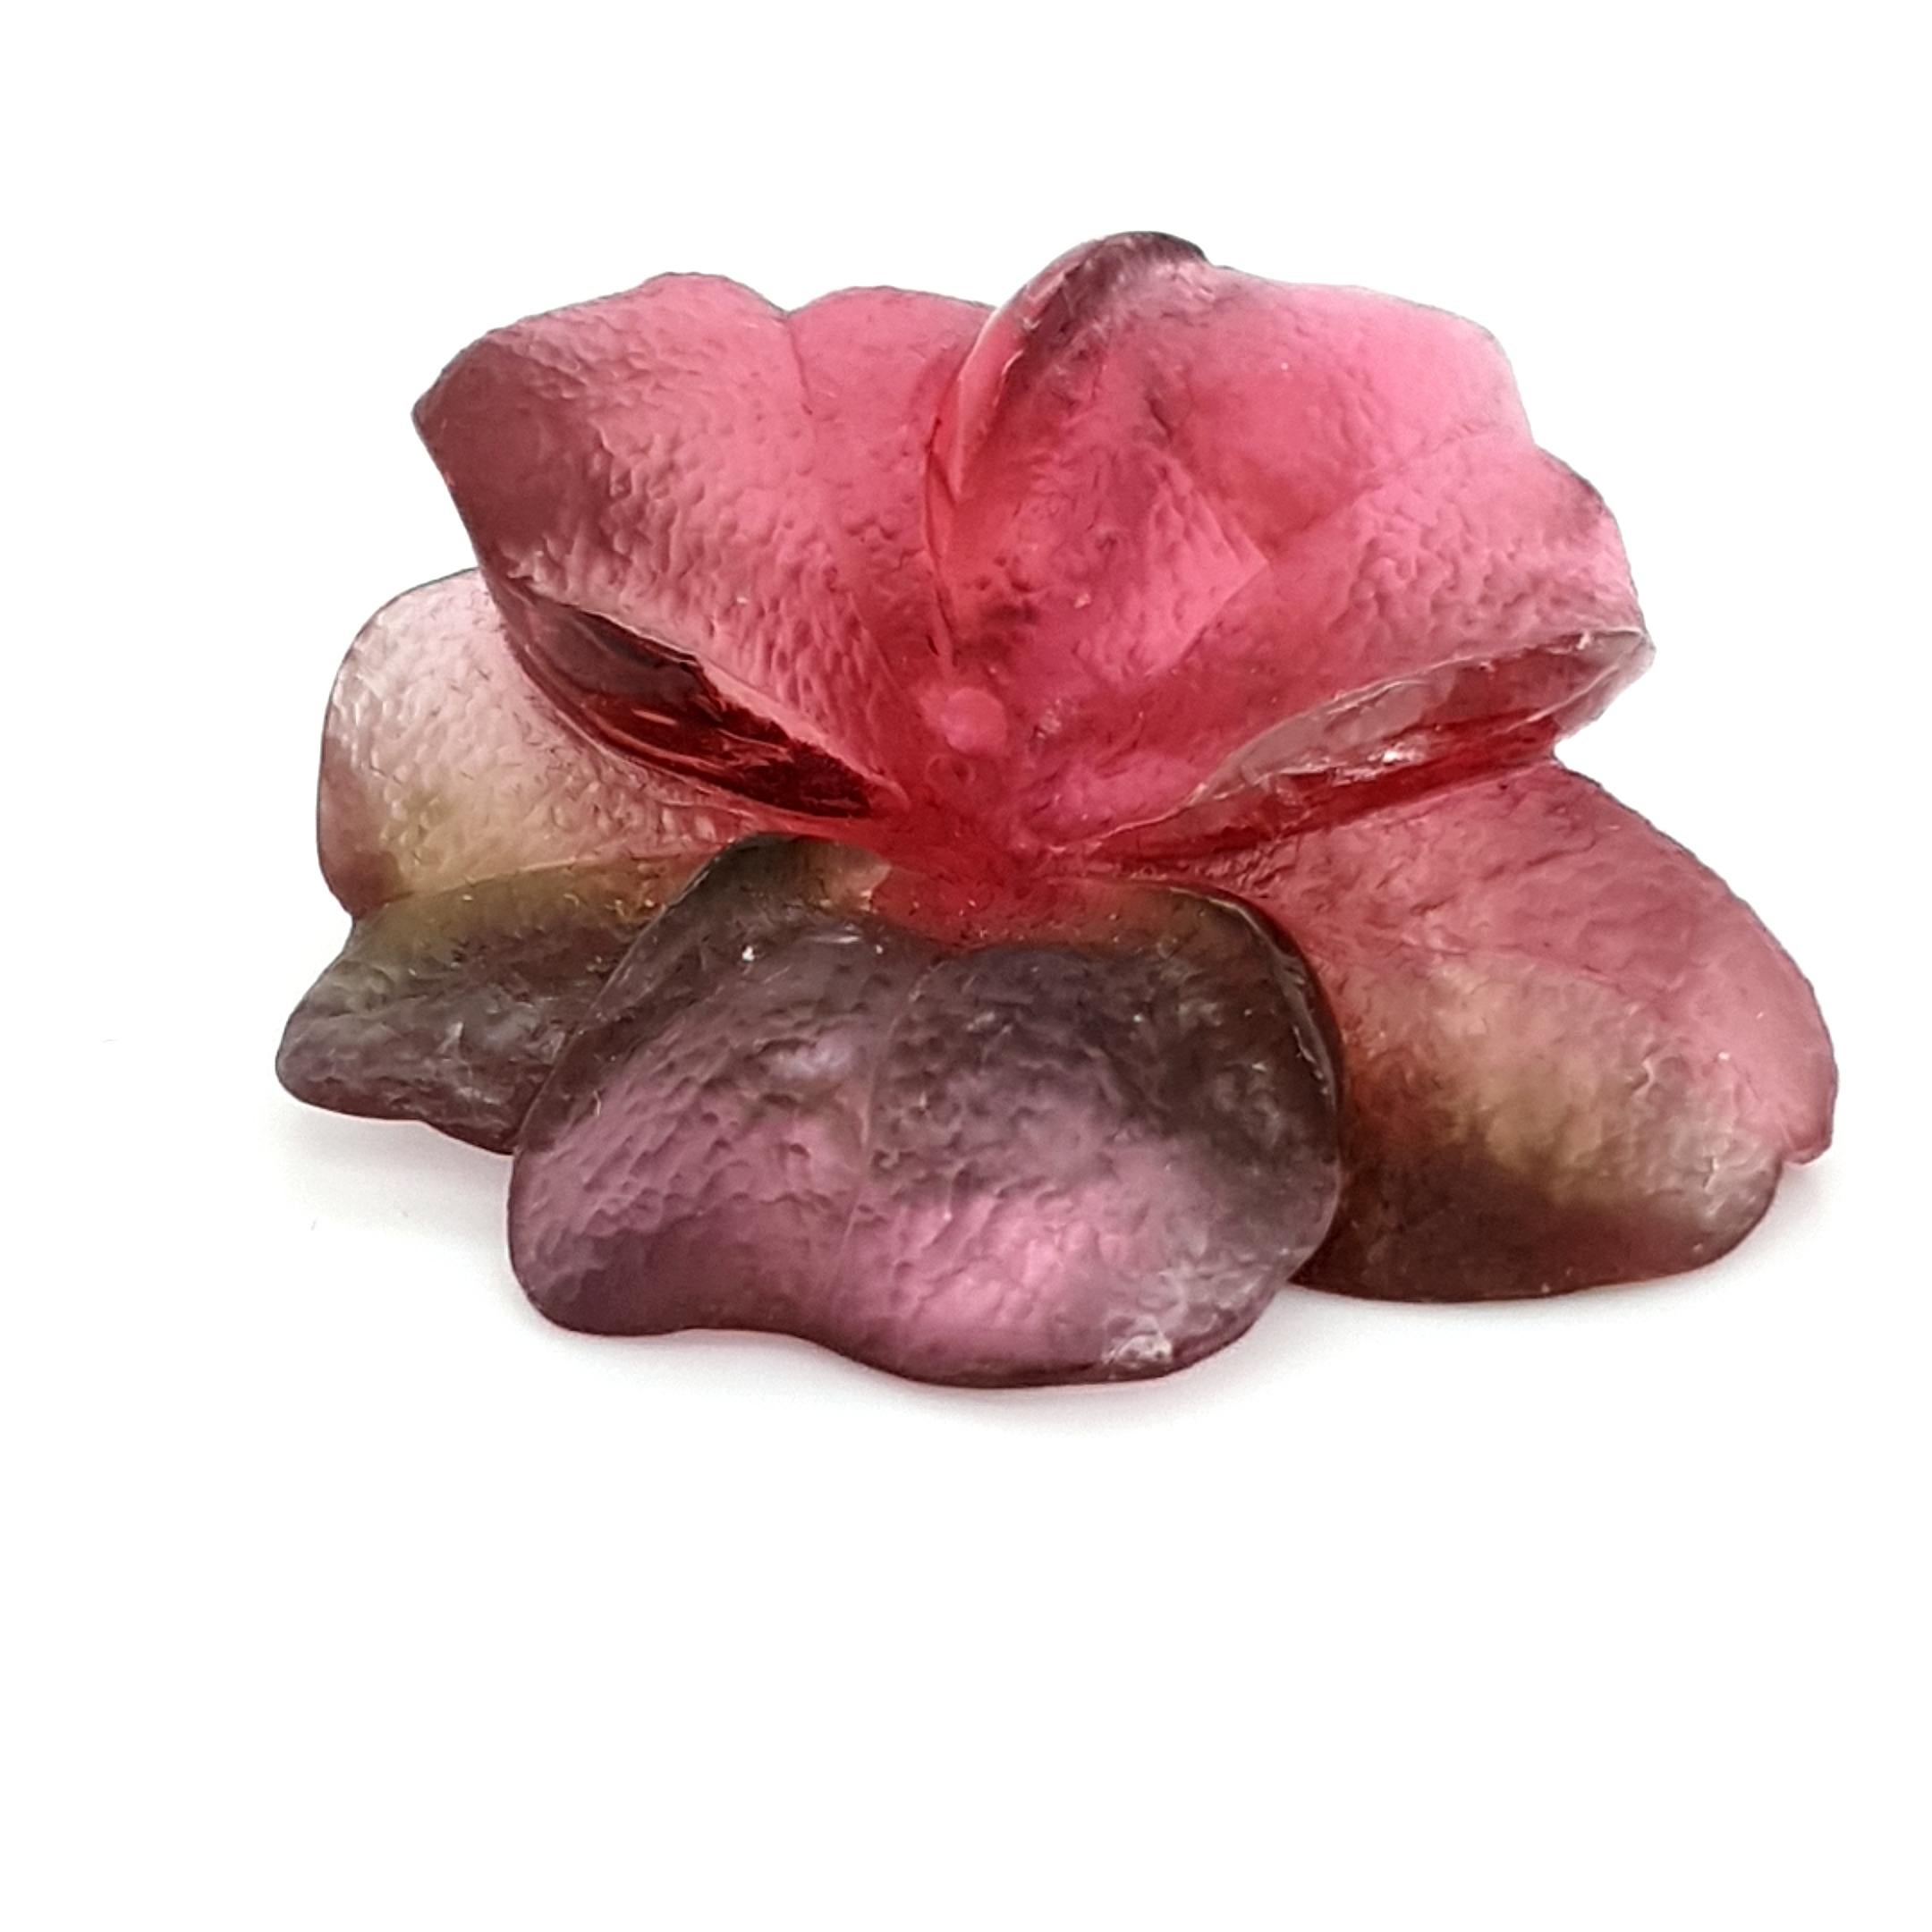 This lovely flower is handcarved (Idar-Oberstein, Germany) out of red-green Bi-Colour Tourmaline from Madagascar.
The noble quality of this piece can be seen in the intensity of the color and the clarity.

measures: 35 x 35 x 17 mm
origin.